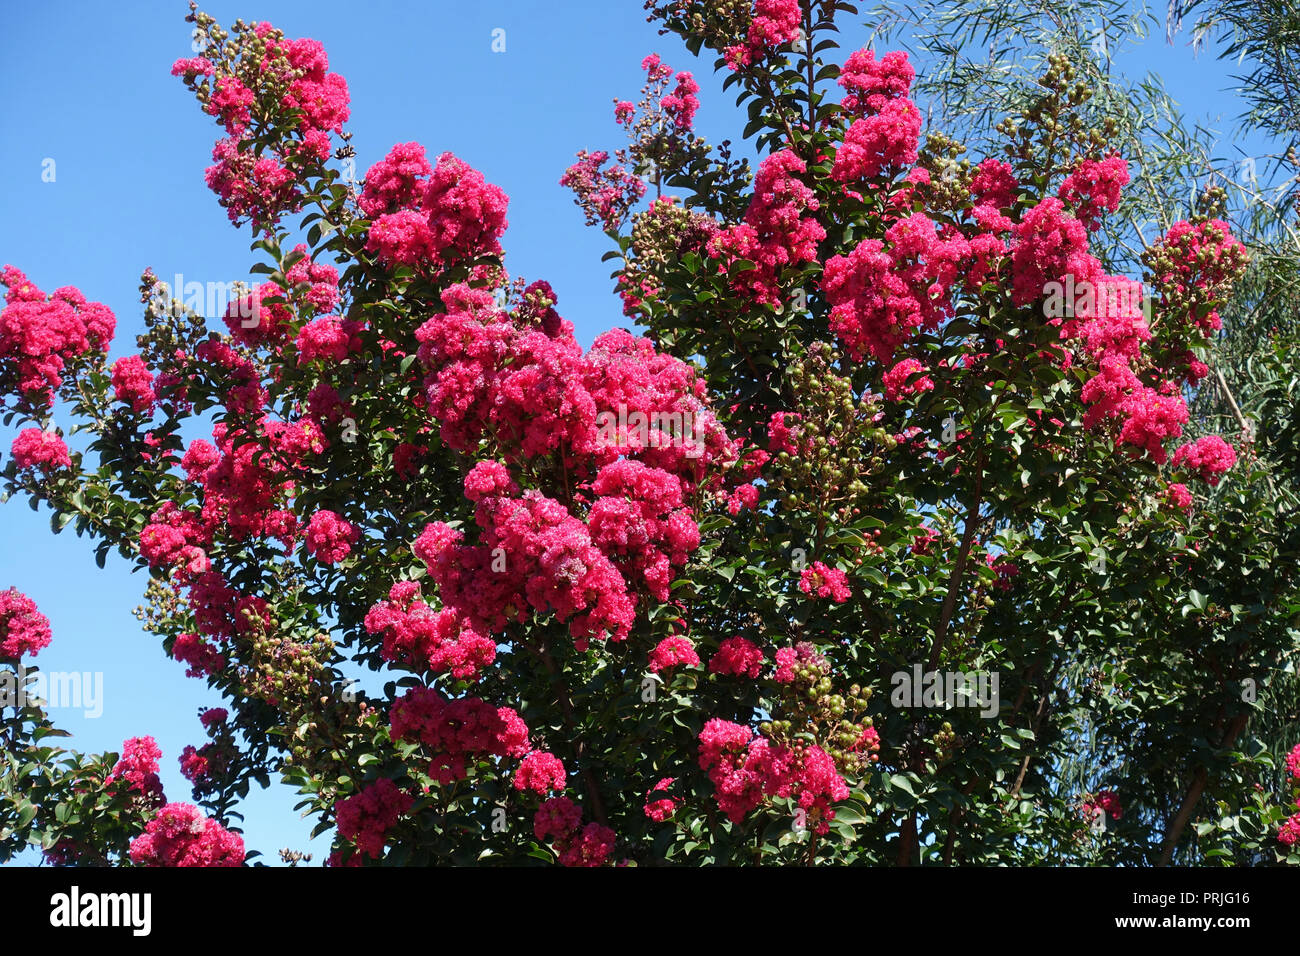 Lagerstroemia or commonly known as crape myrtle or crepe myrtle against blue sky Stock Photo